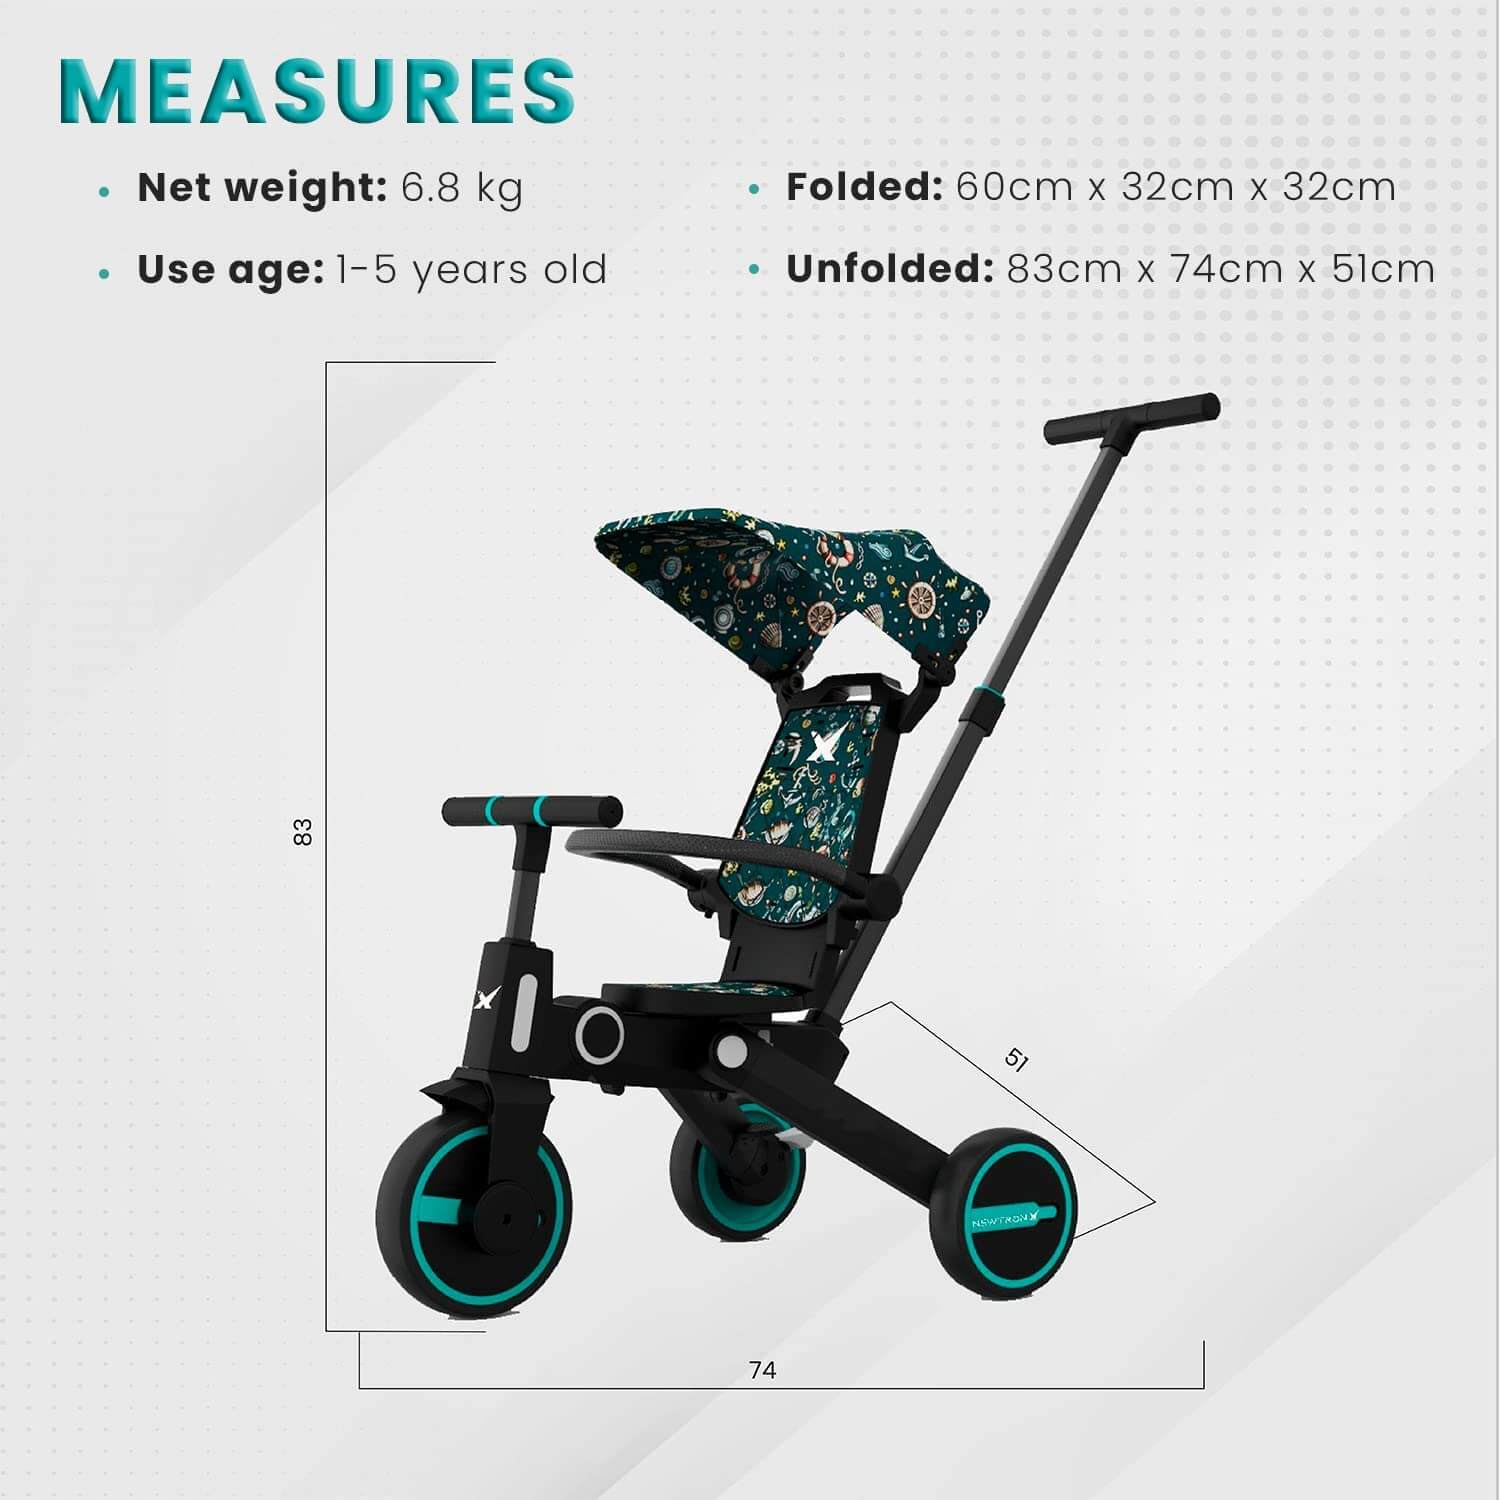 Foldable & Reversible Tricycle Stroller